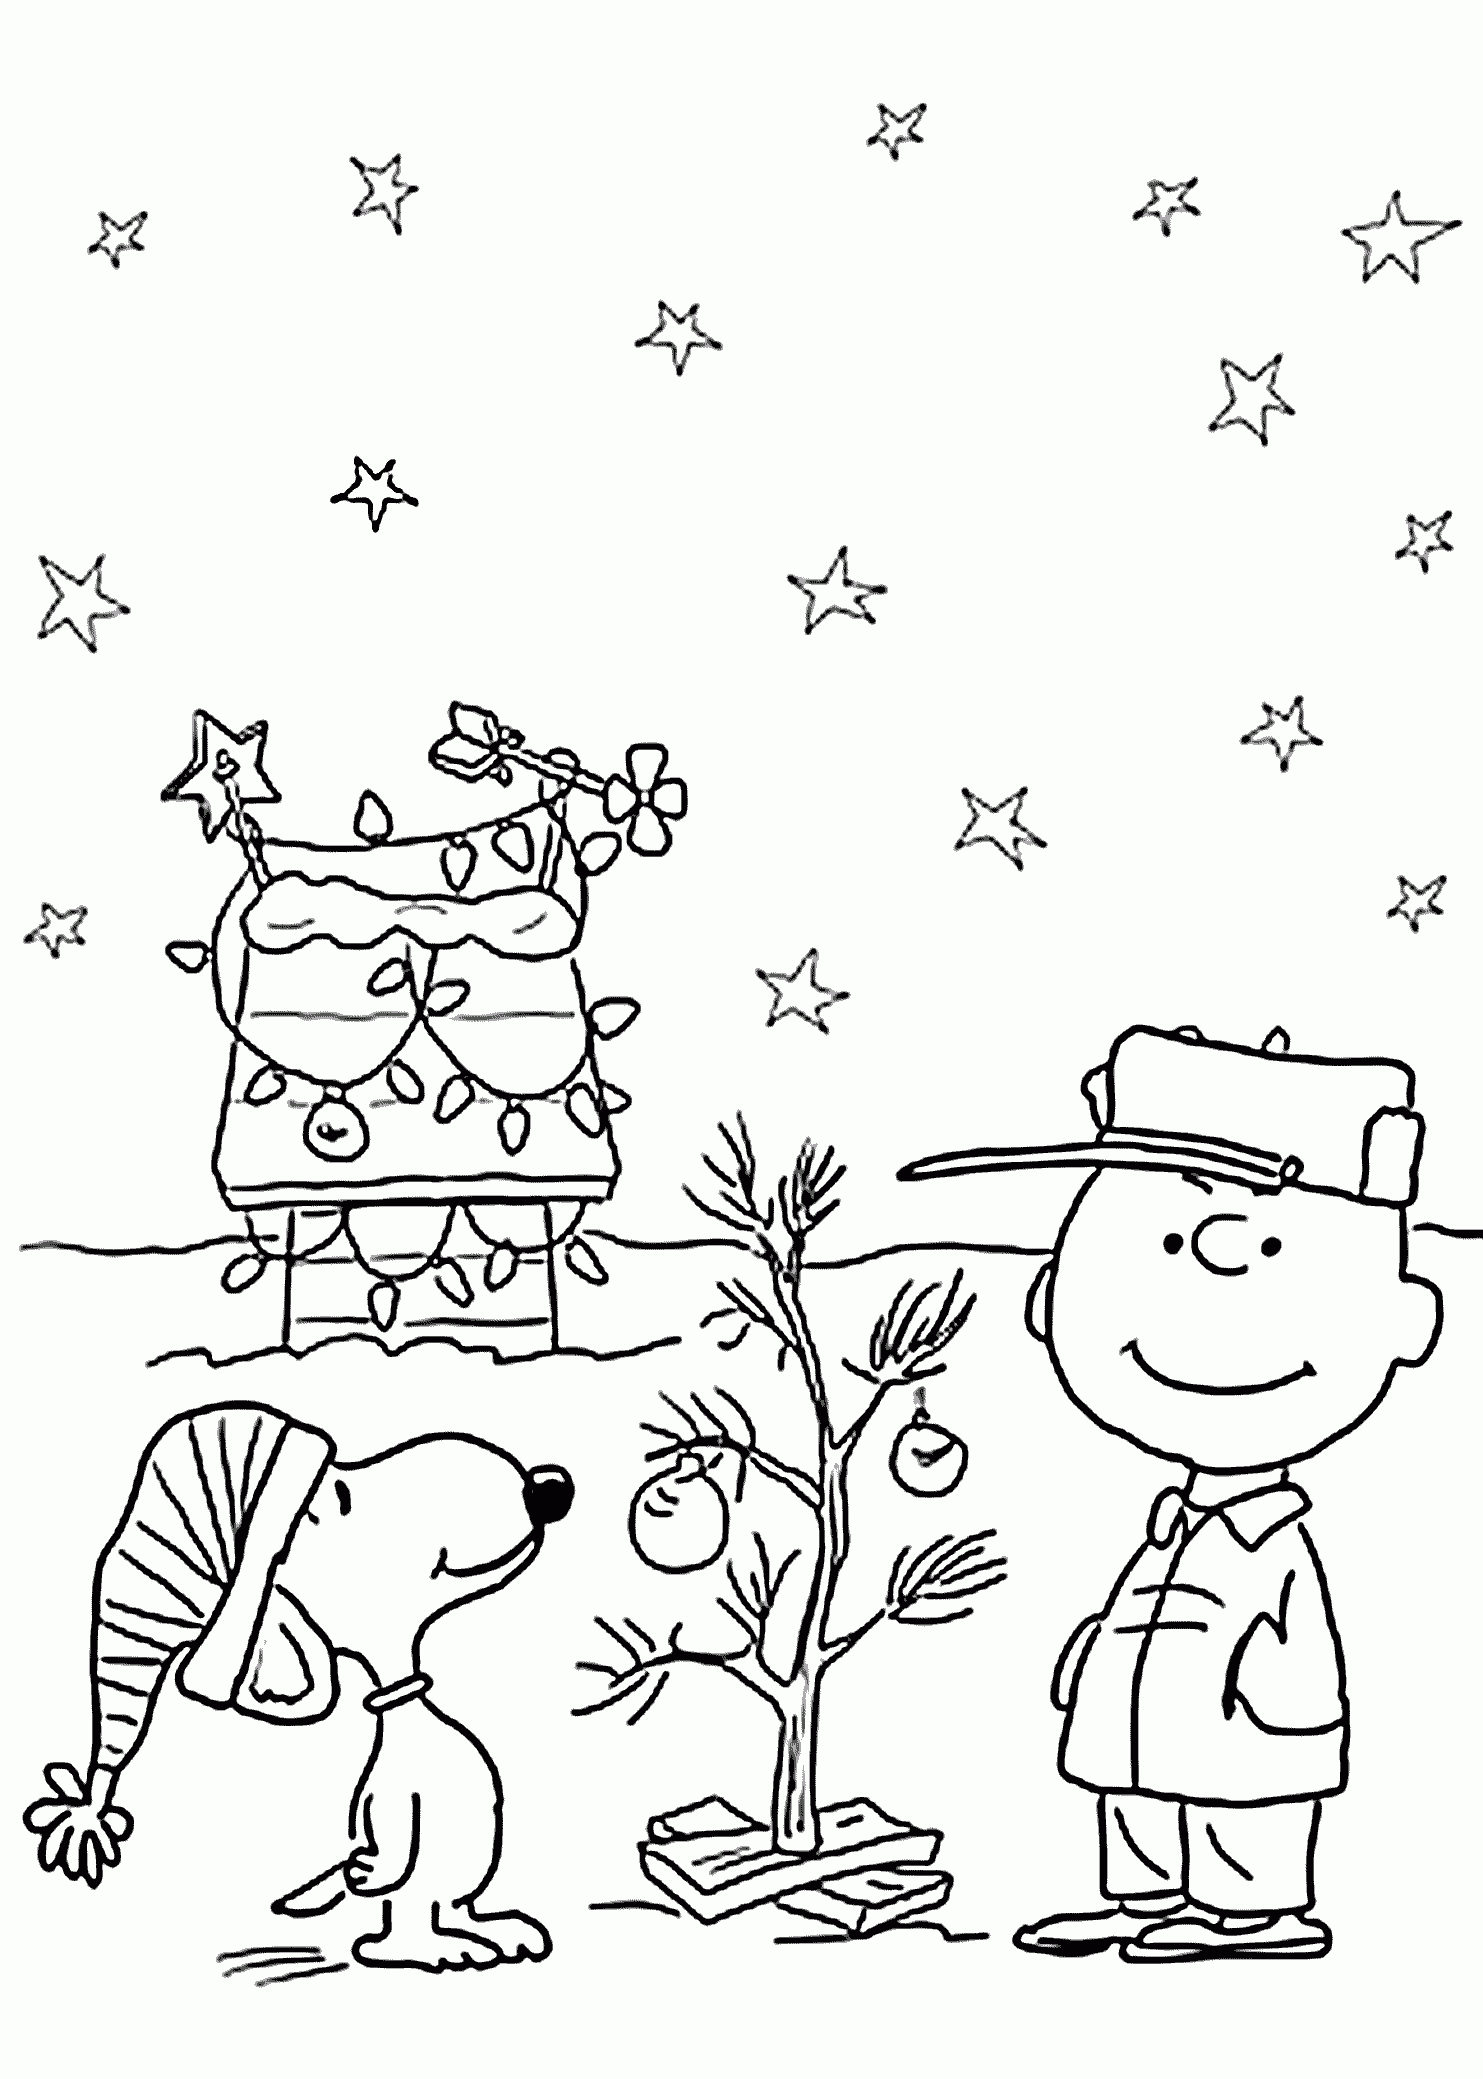 Charlie Brown And Christmas Coloring Pages For Kids, Printable Free - Free Printable Christmas Cartoon Coloring Pages